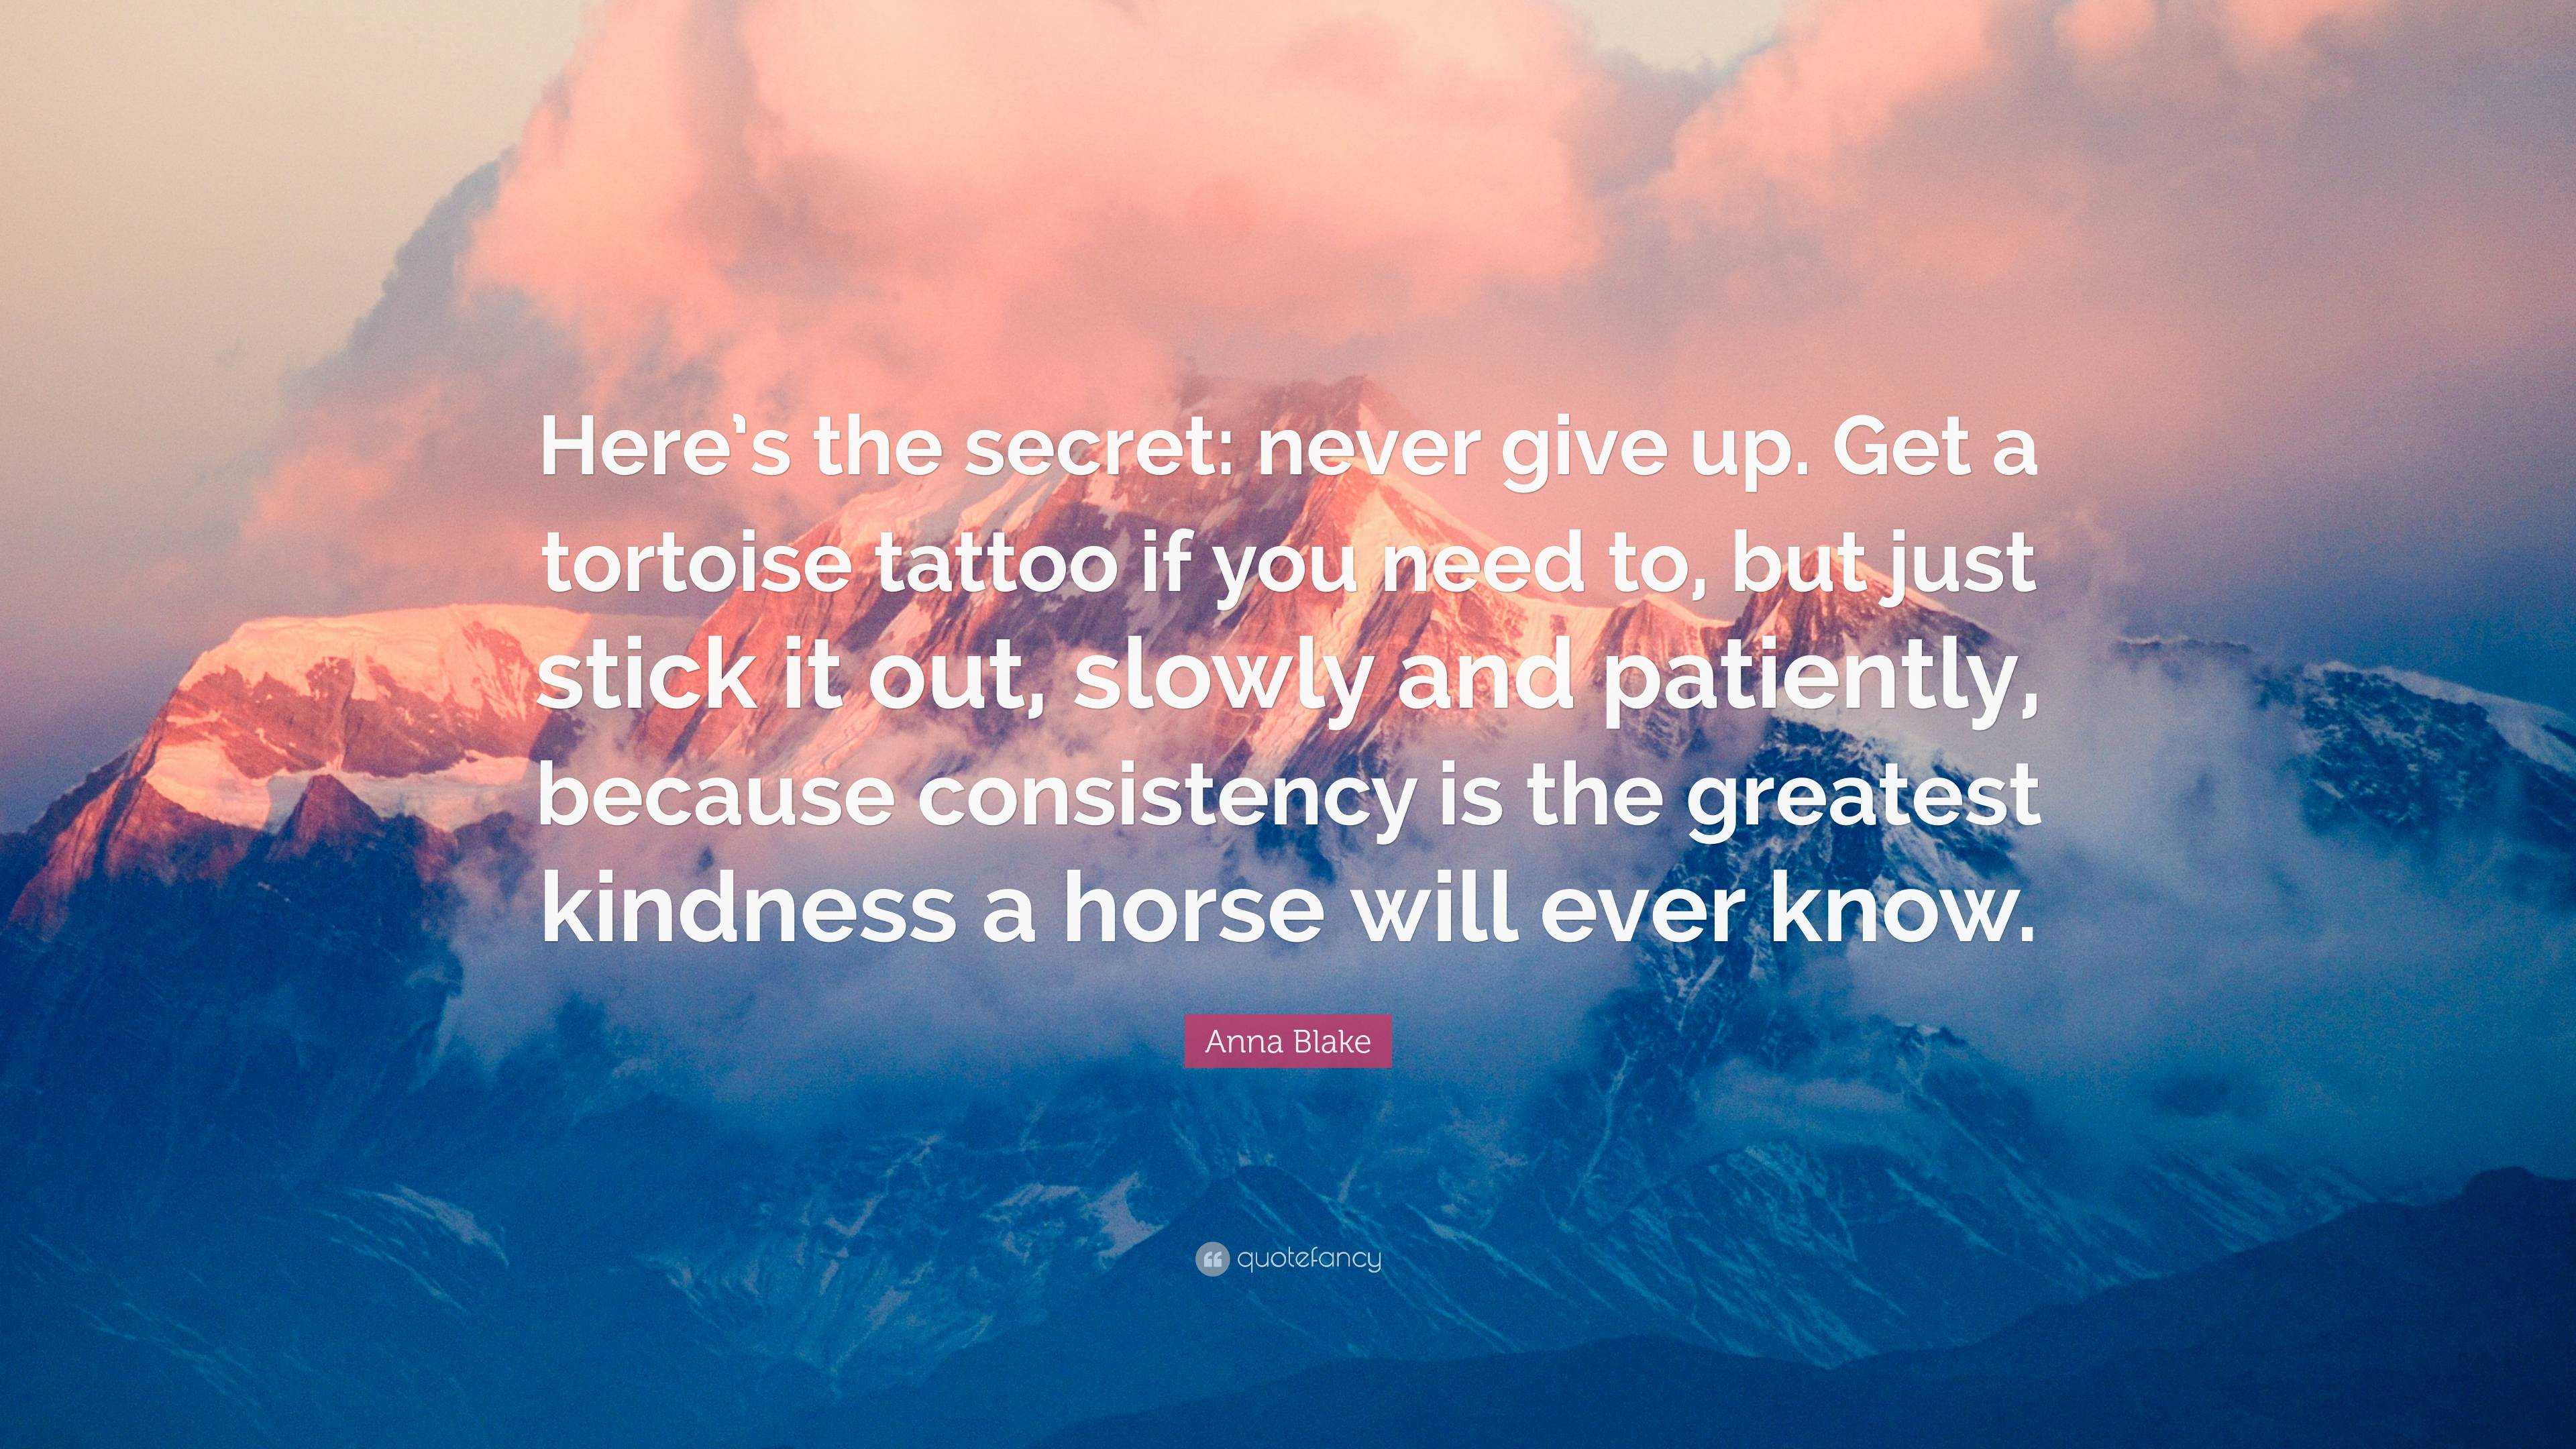 Anna Blake Quote: “Here's the secret: never give up. Get a tortoise tattoo  if you need to, but just stick it out, slowly and patiently, bec...”